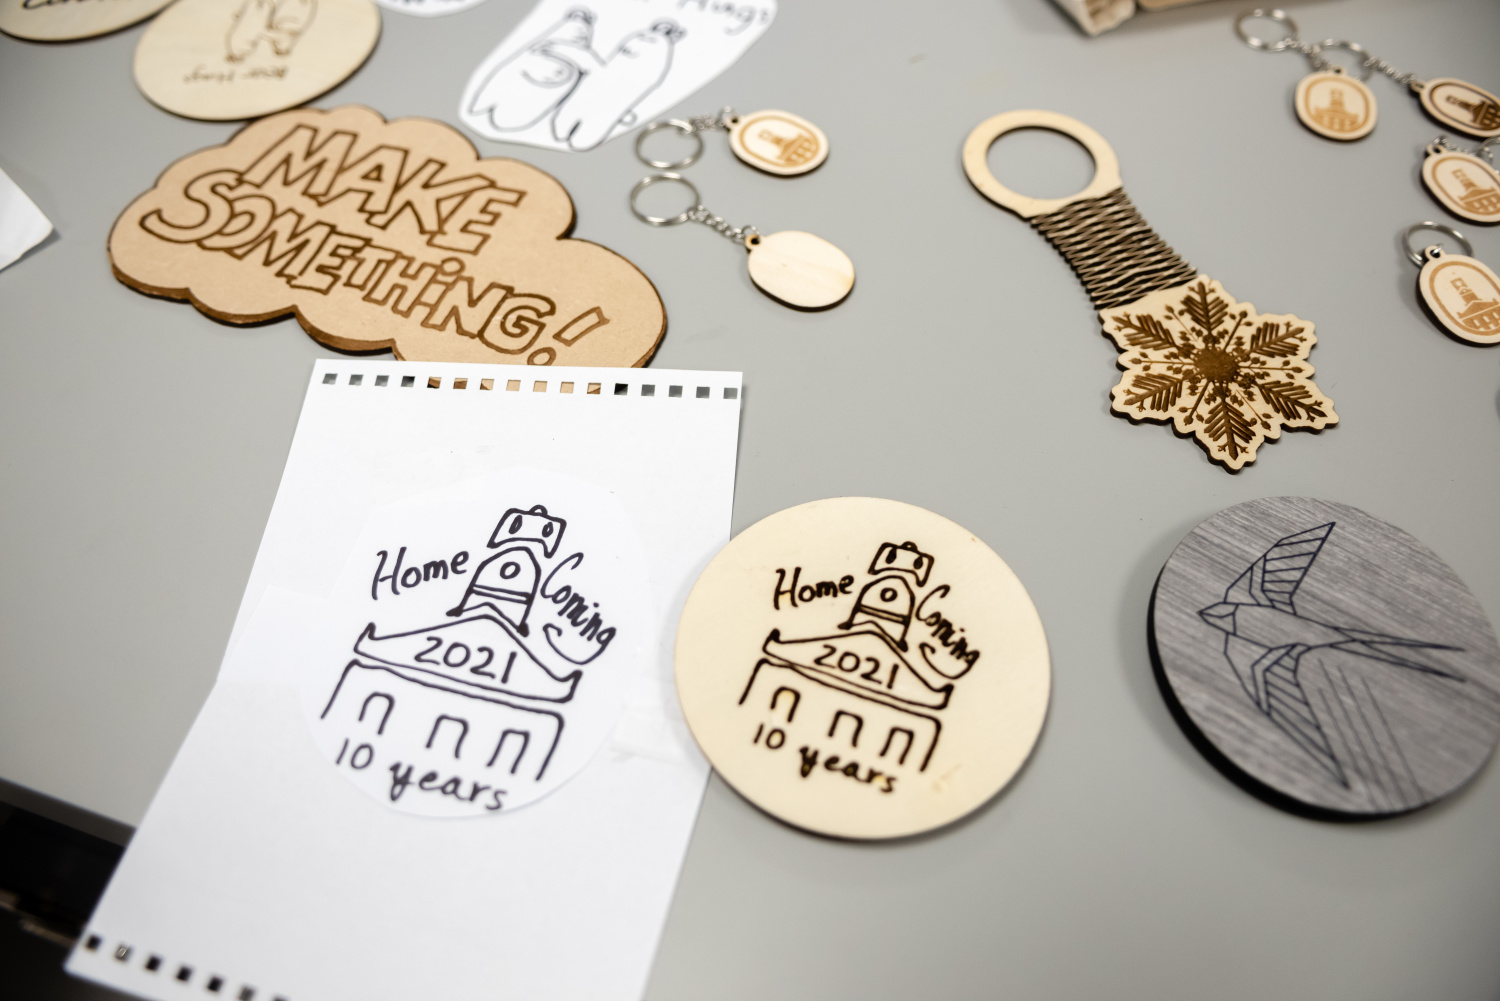 A collection of laser cut and etched objects